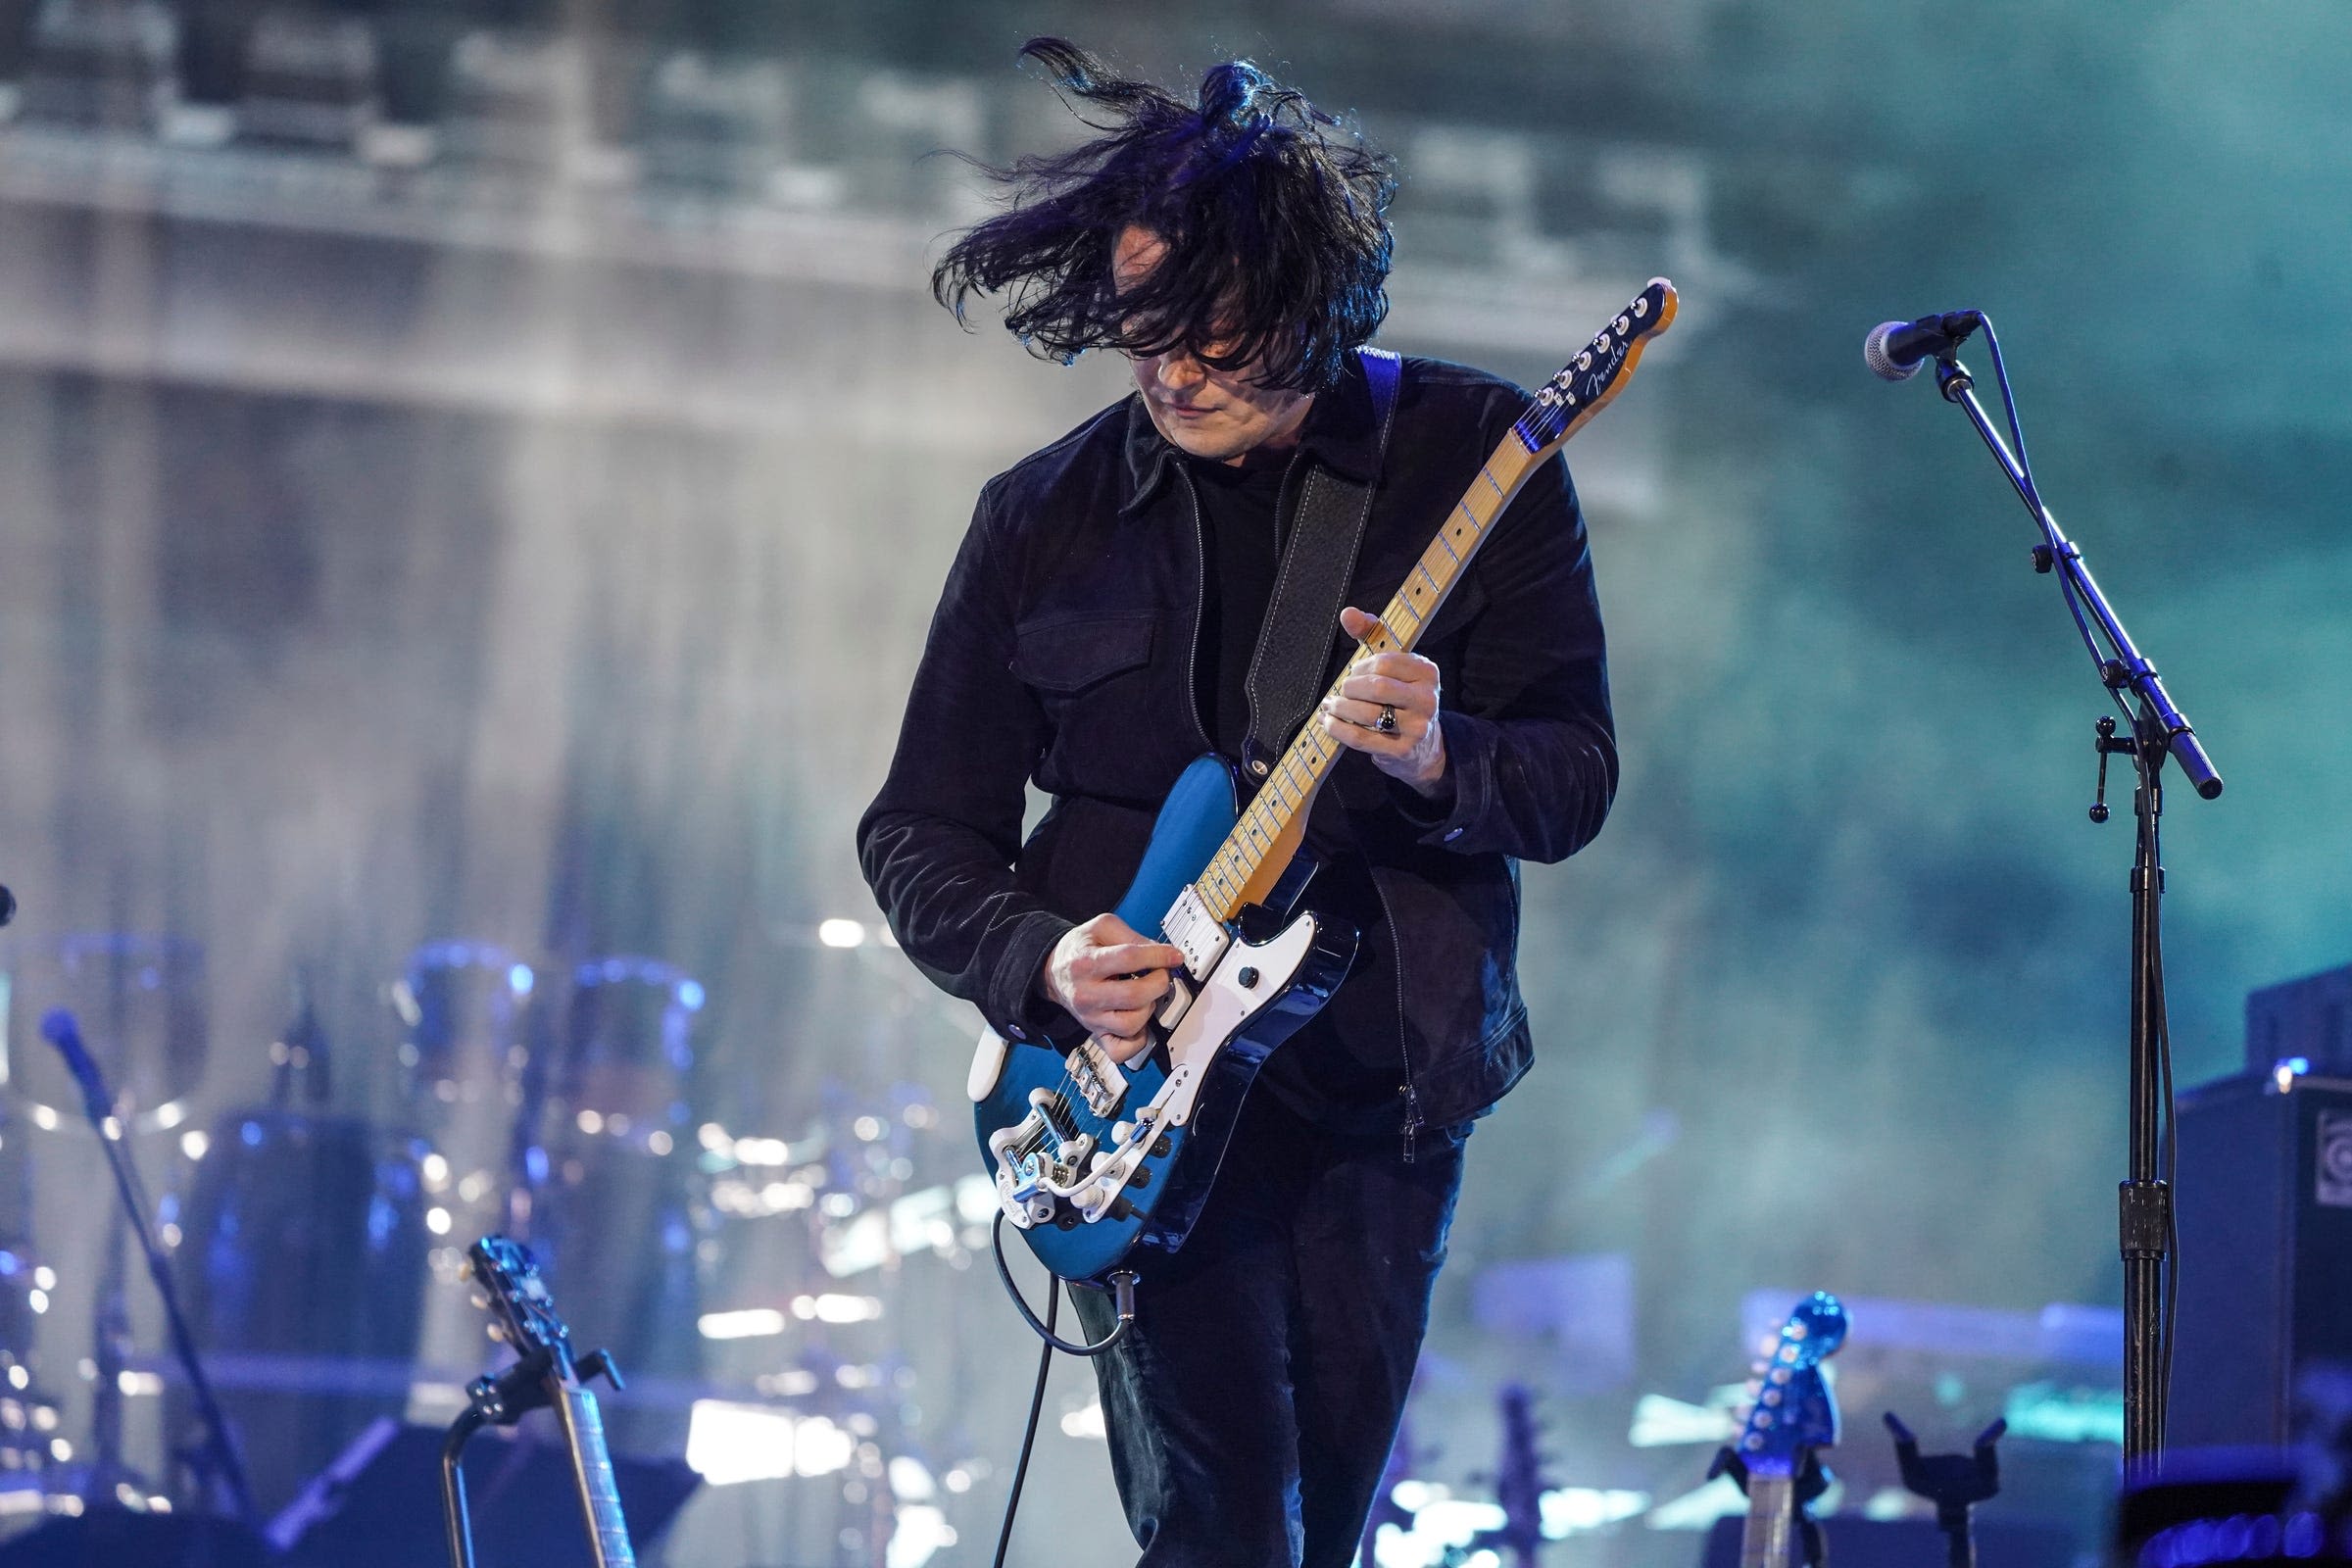 Jack White didn't just release a surprise album — he made a stand for rock mystique